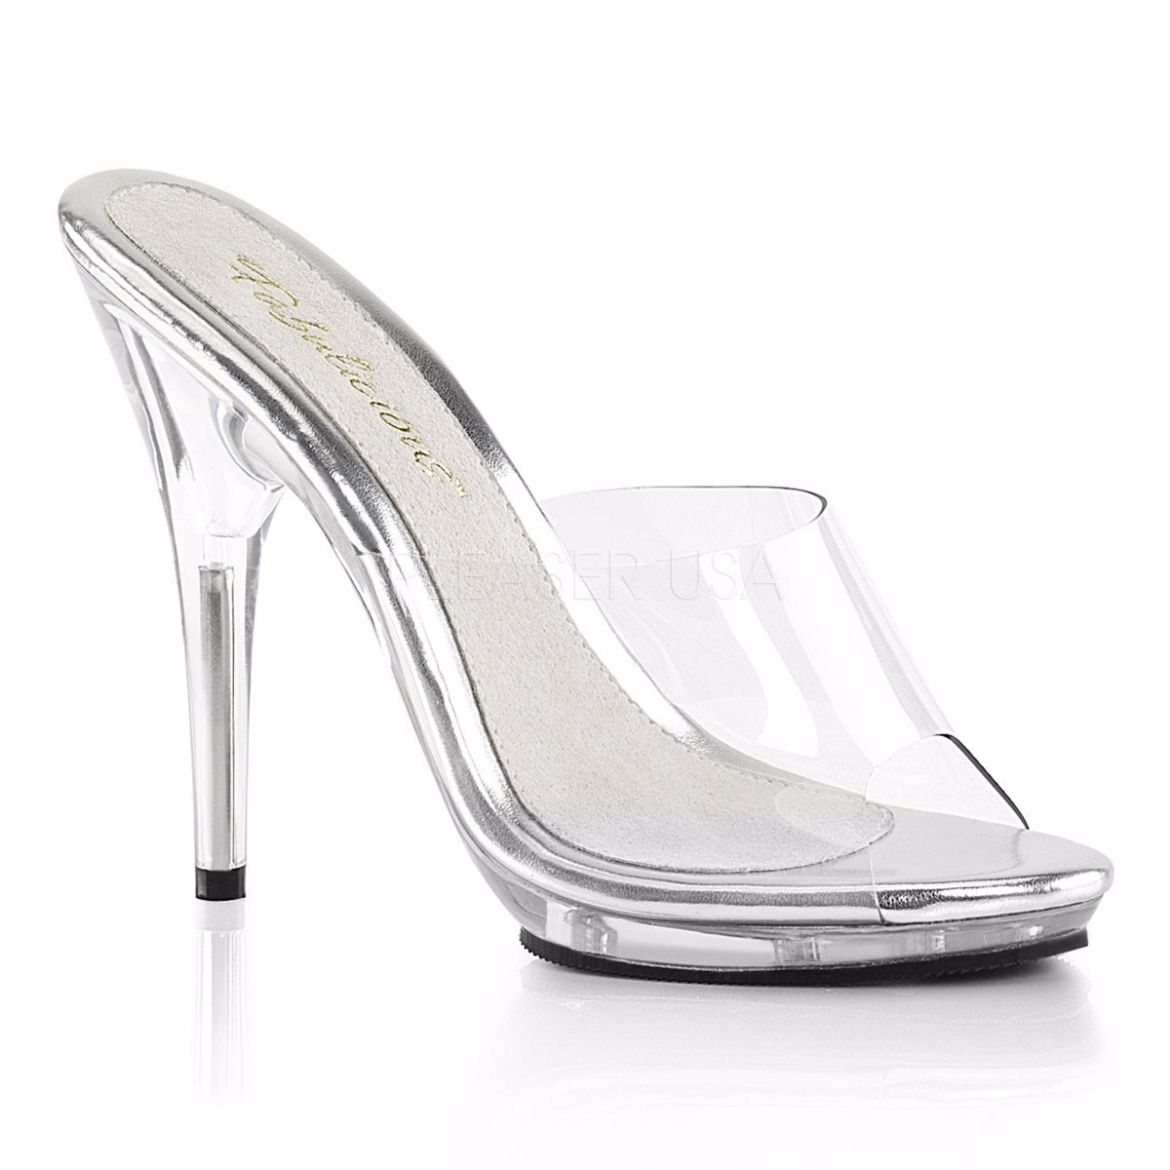 Product image of Fabulicious Poise-501 Clear/Clear, 5 inch (12.7 cm) Heel, 3/8 inch (1 cm) Platform Slide Mule Shoes